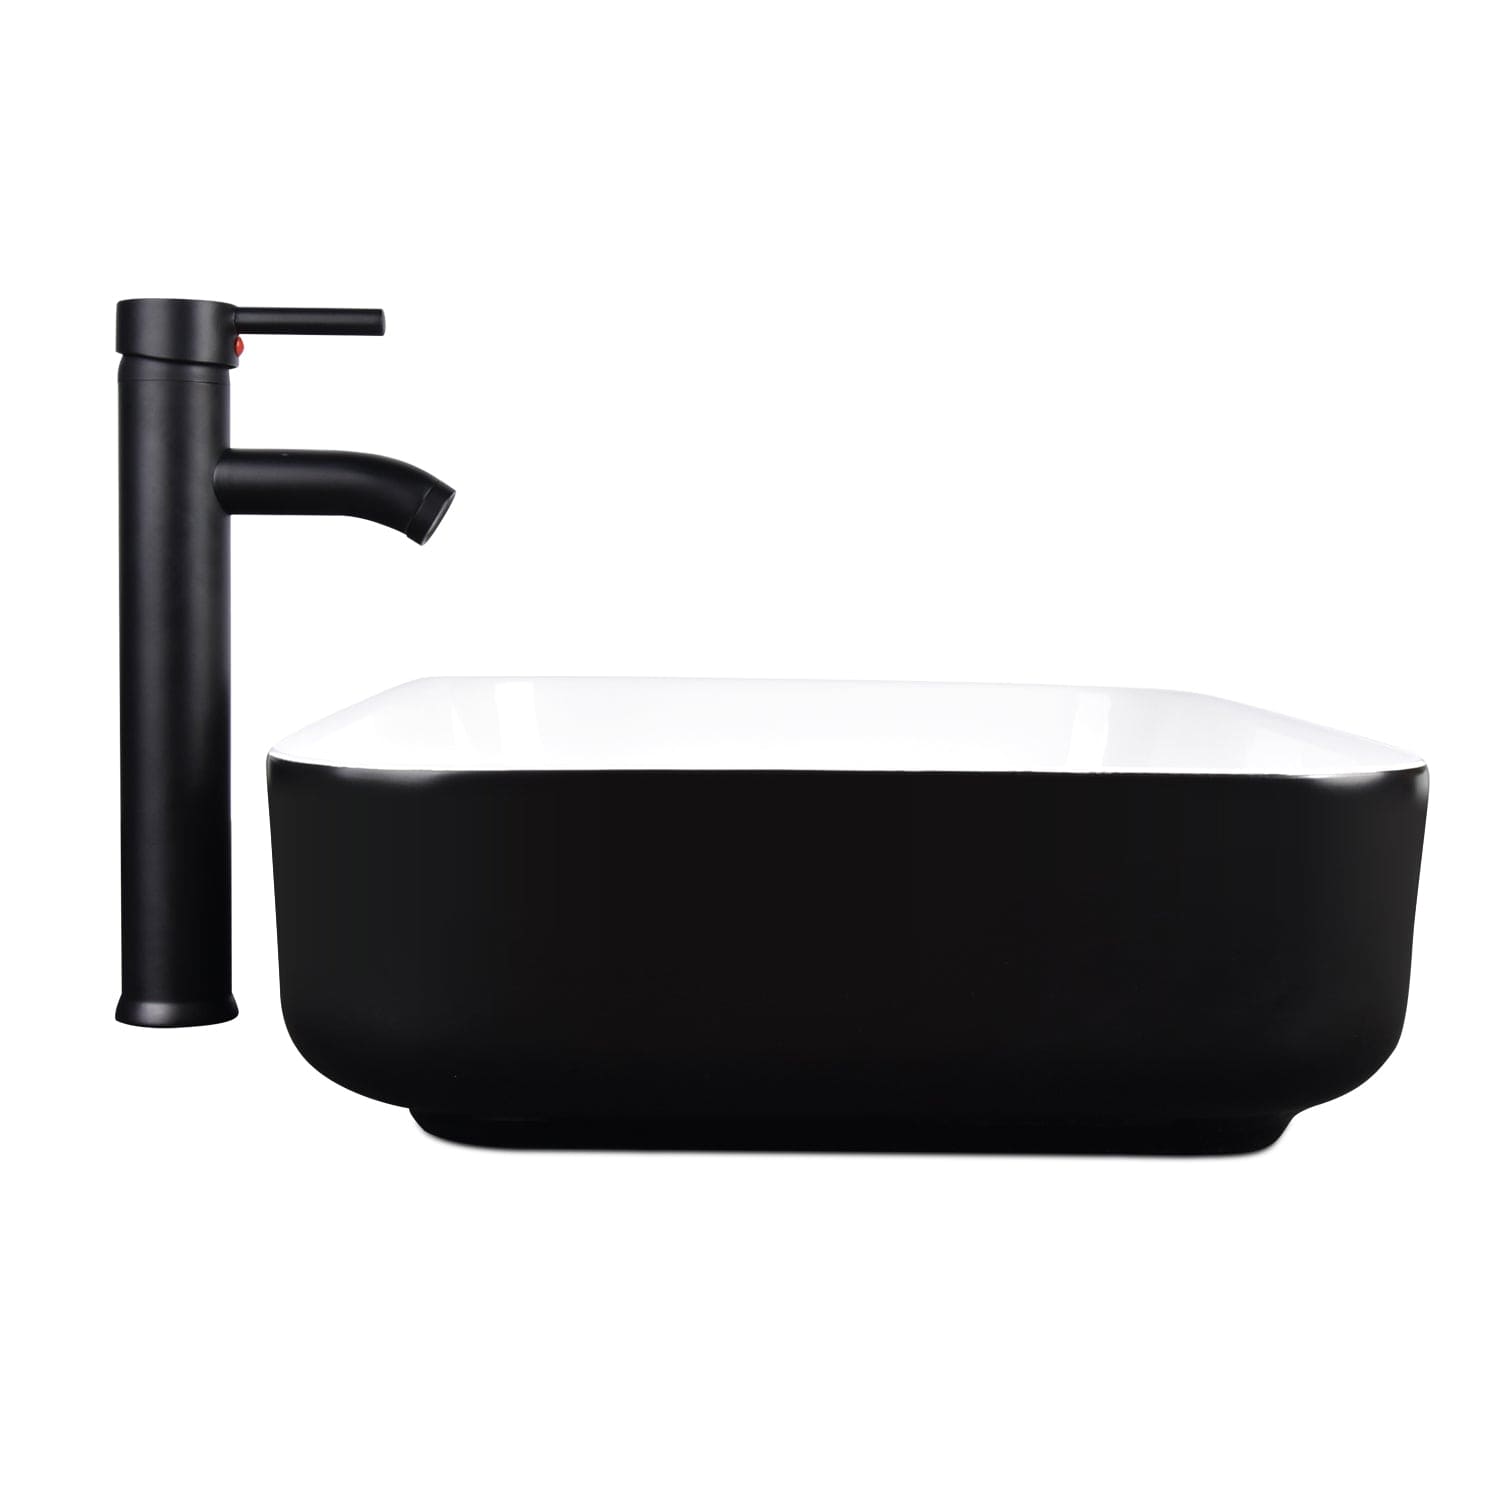 Elecwish Vessel Sinks Black and White Ceramic Bathroom Sink Faucet and Drain Combo,Rectangle